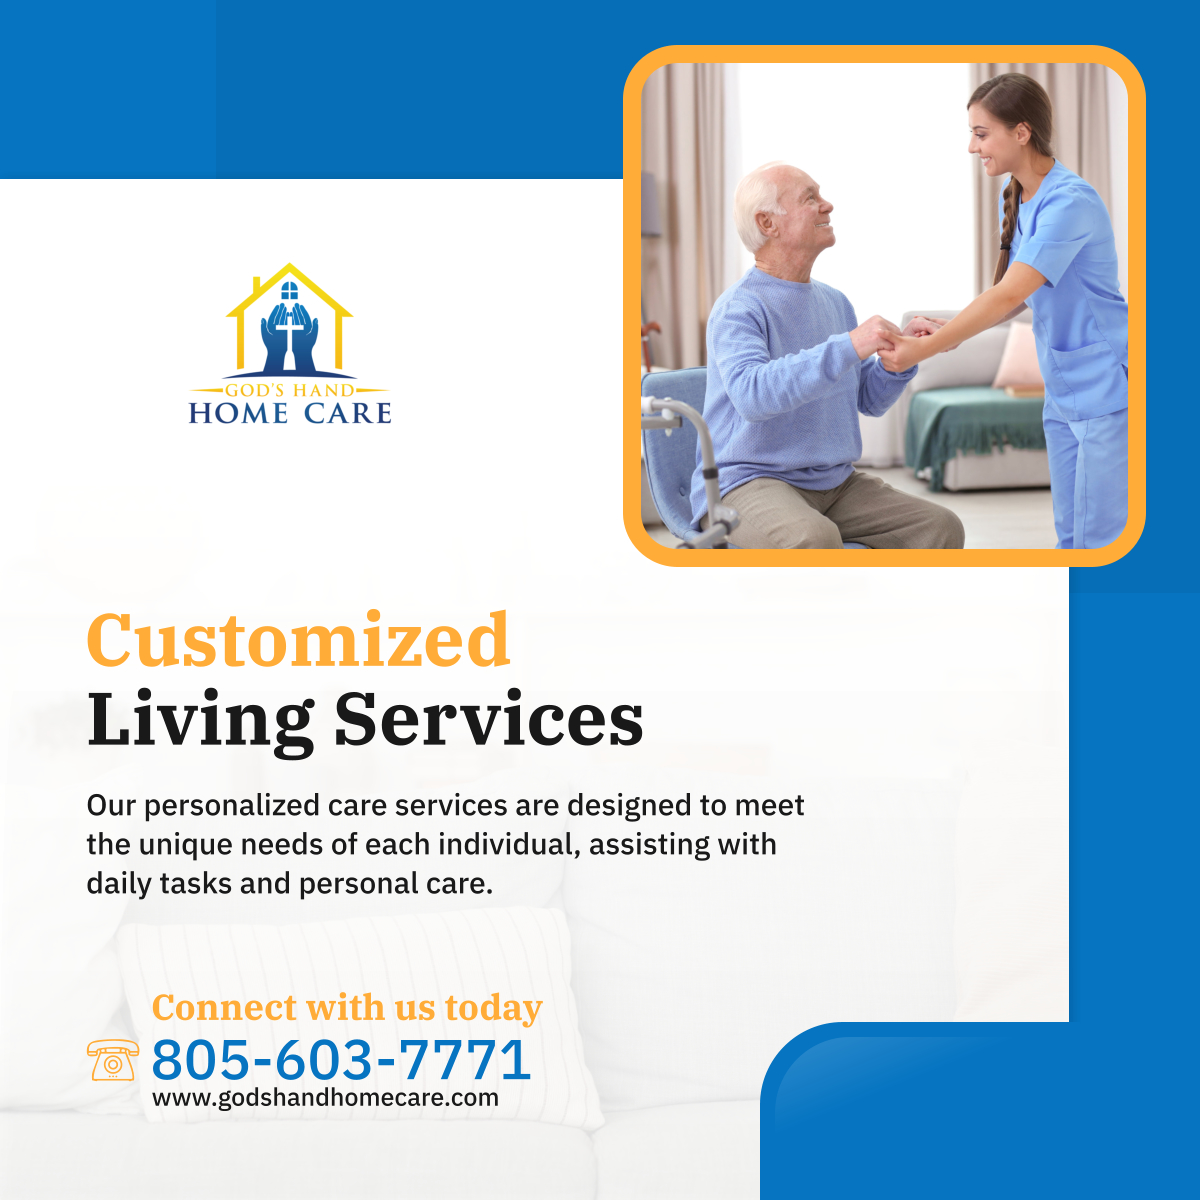 Tailored care for everyday needs. Discover how our customized living services can make a difference in your or your loved ones' daily lives. 

#OxnardCA #HomeCare #PersonalizedCare